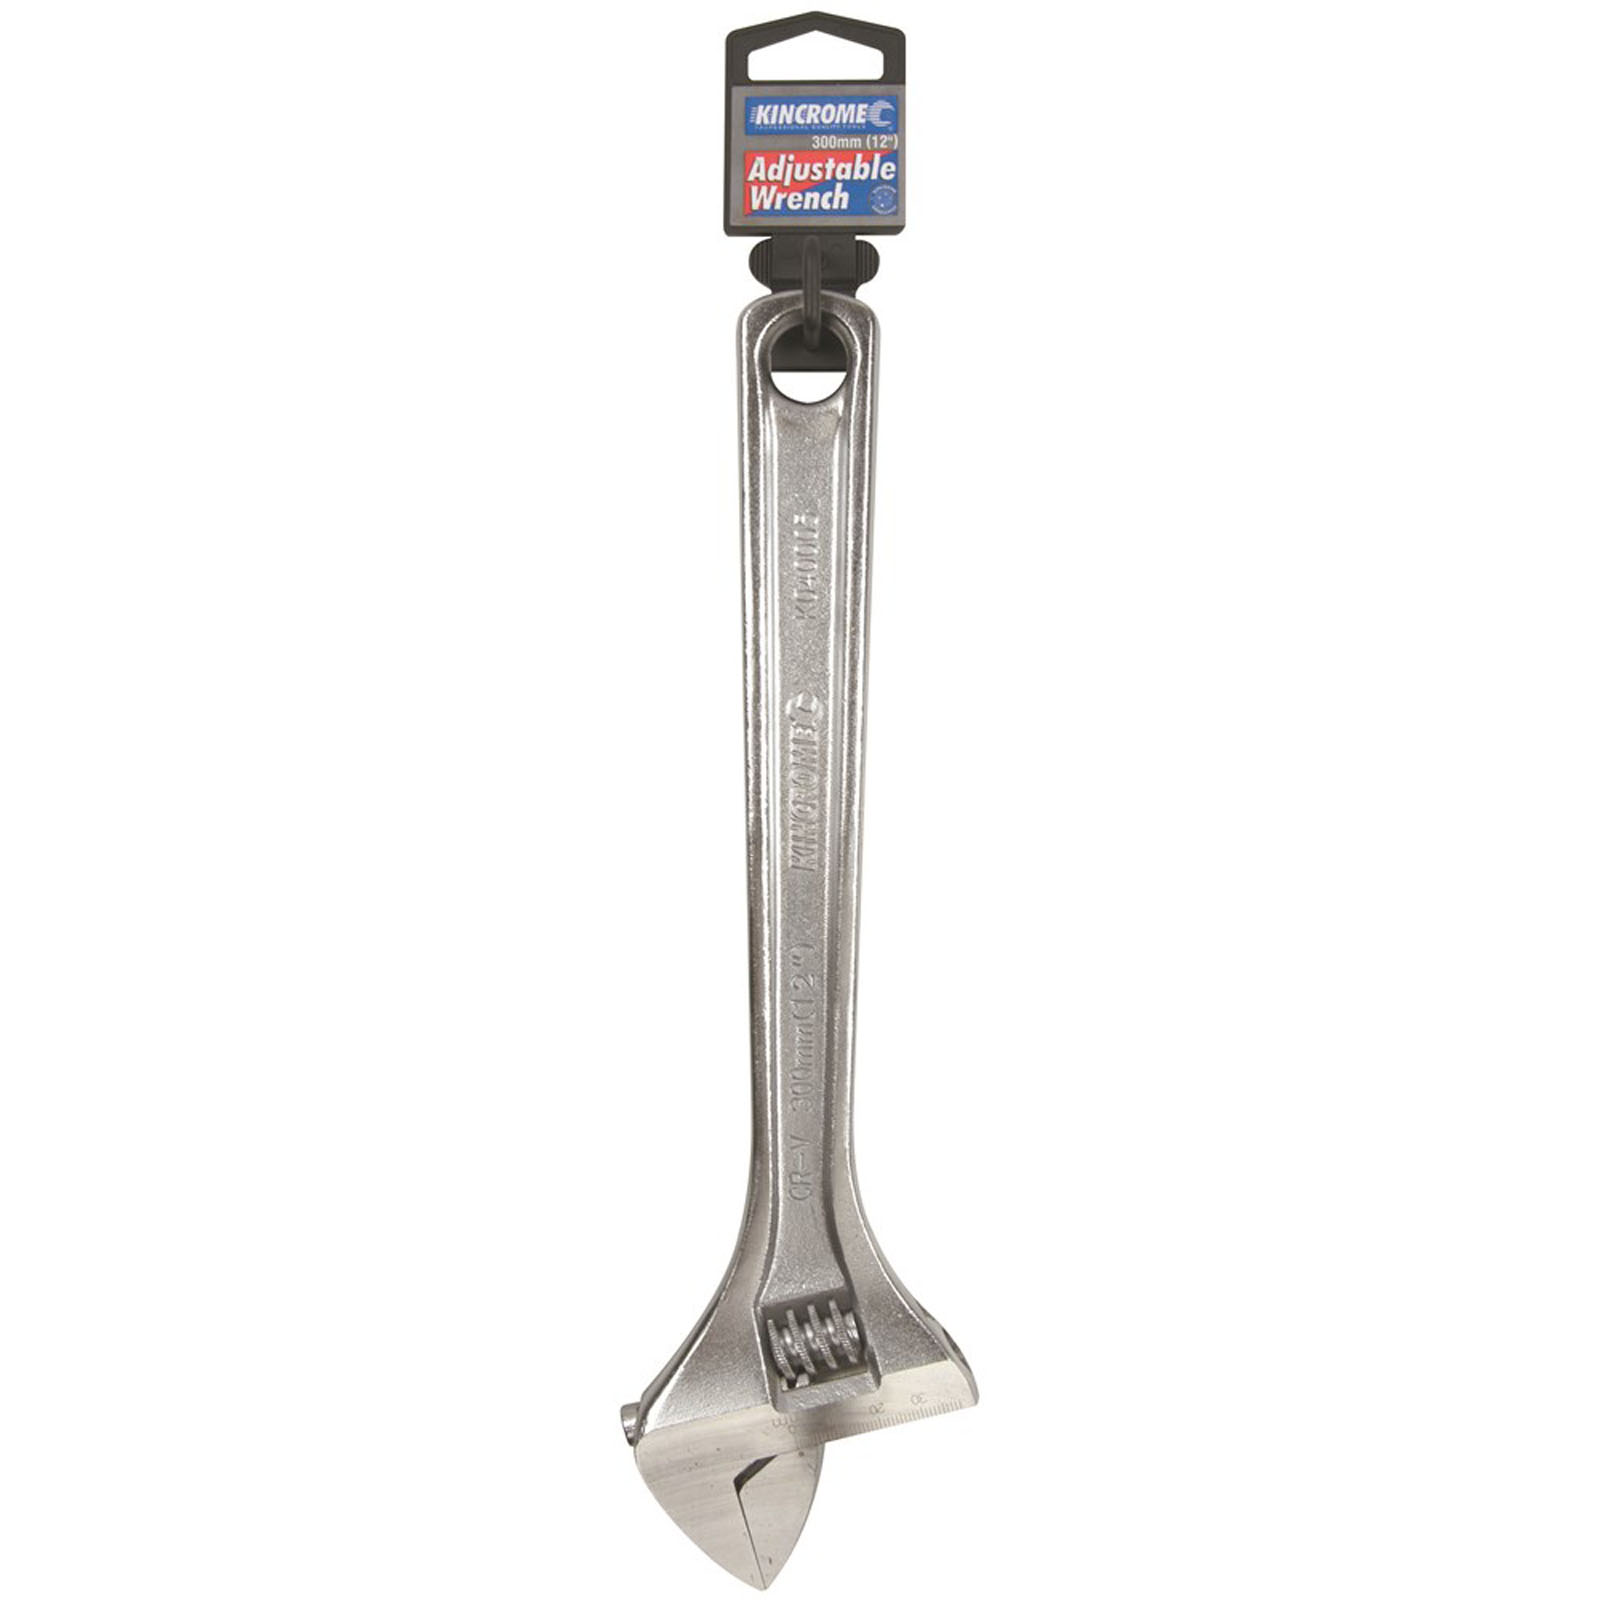 Adjustable Wrench 300mm (12